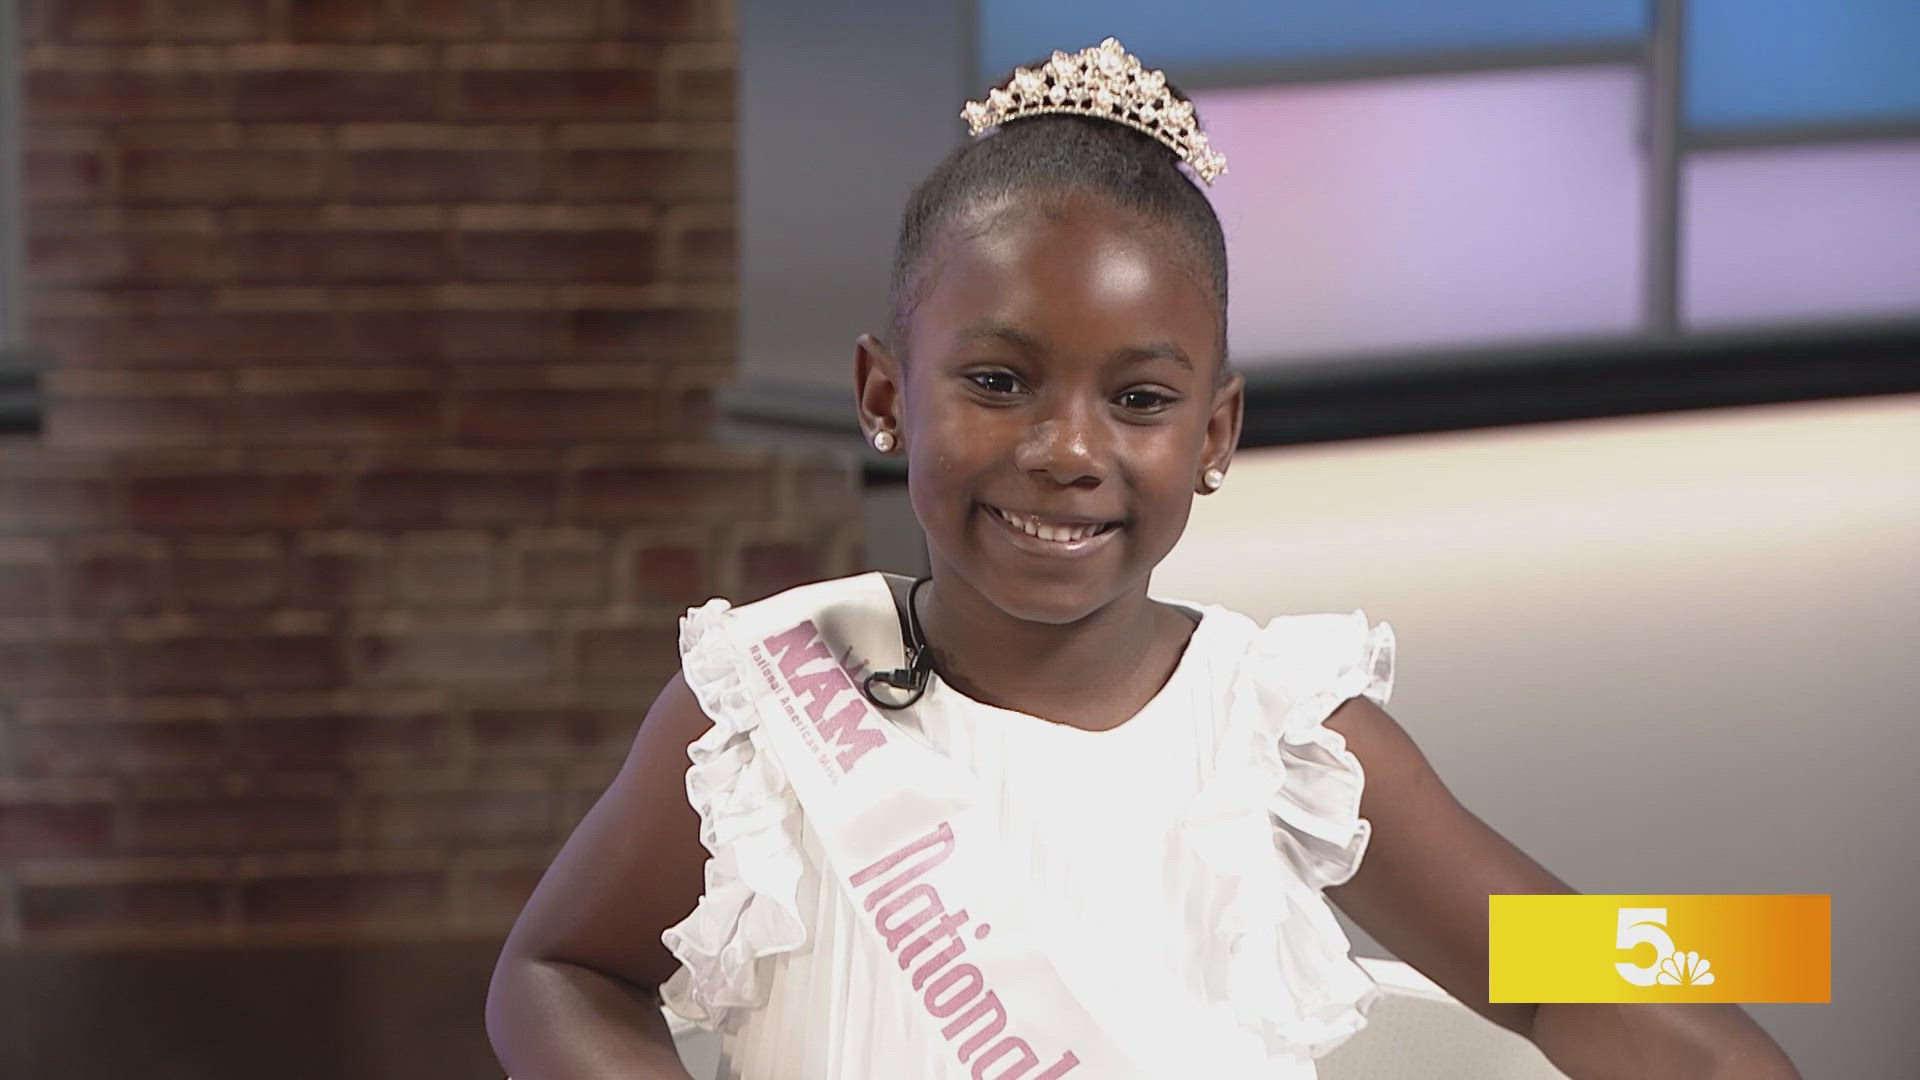 Meet the young trailblazer who is headed to the National American Miss pageant.